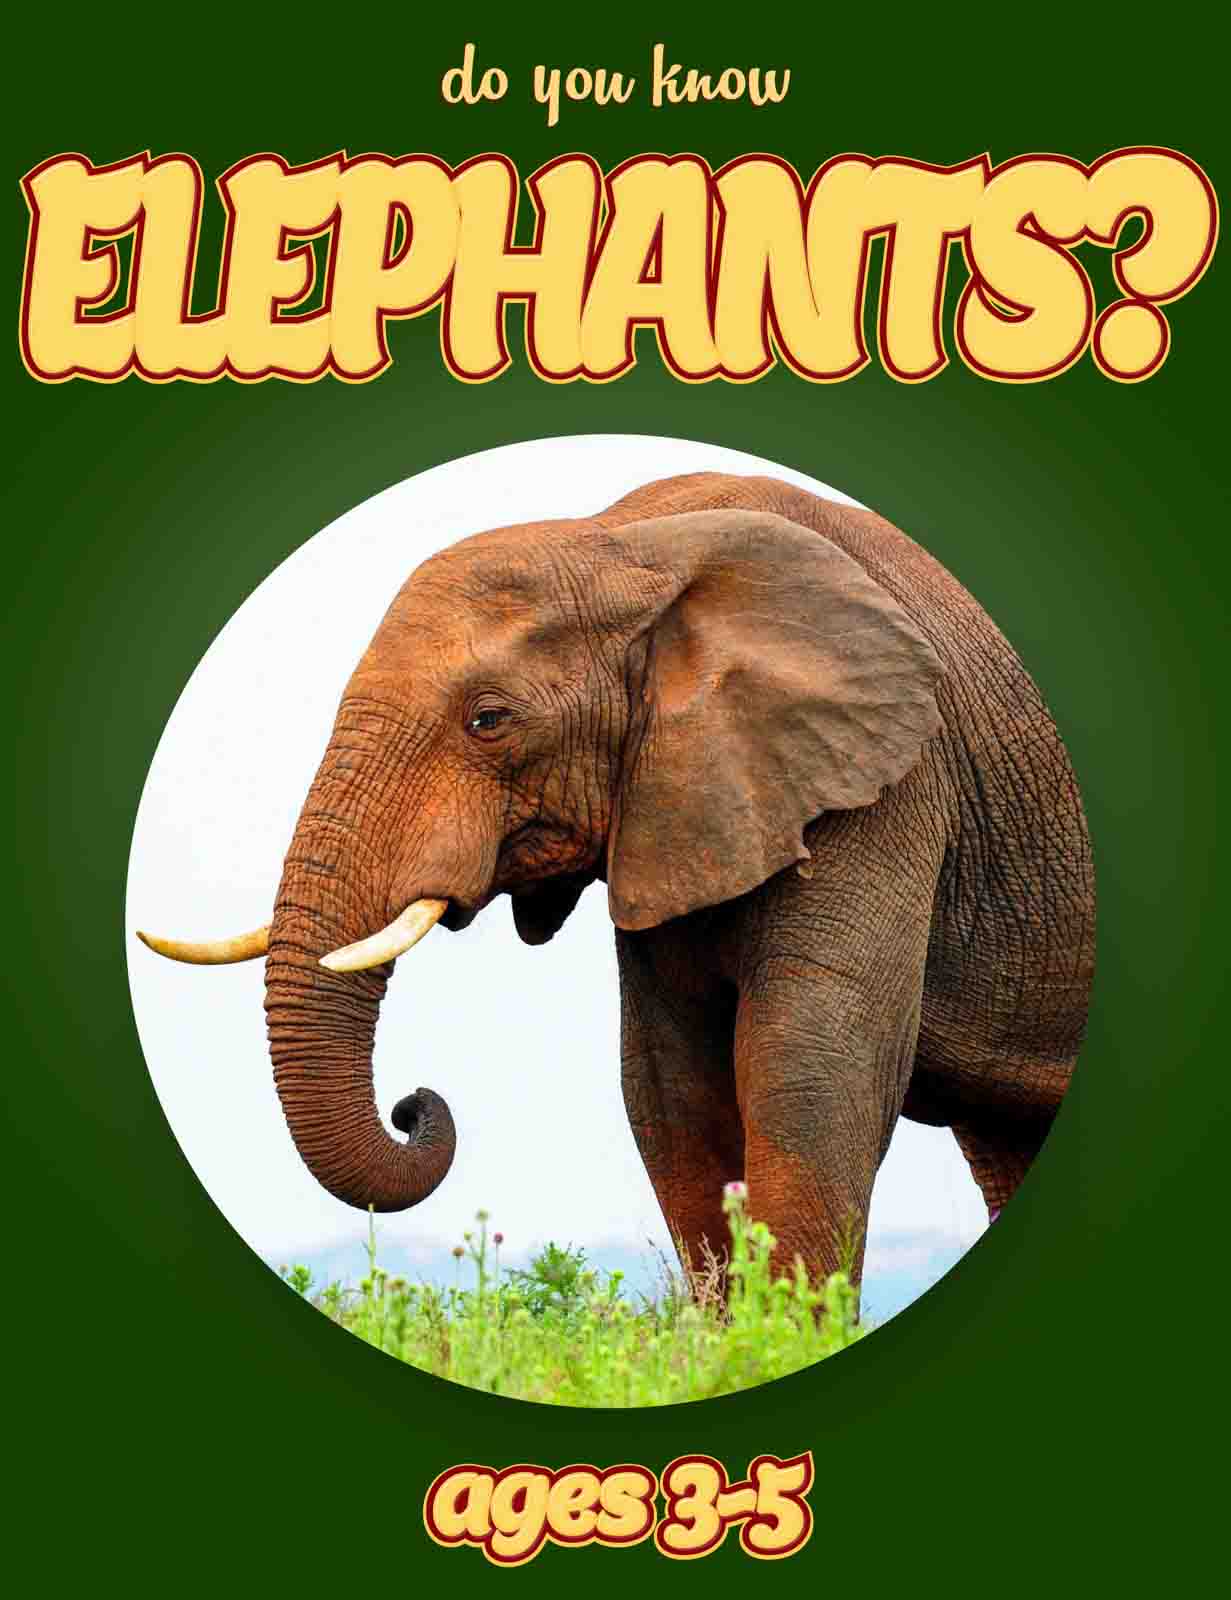 Elephant Facts For Kids Ages 3 5 Do You Know Elephants